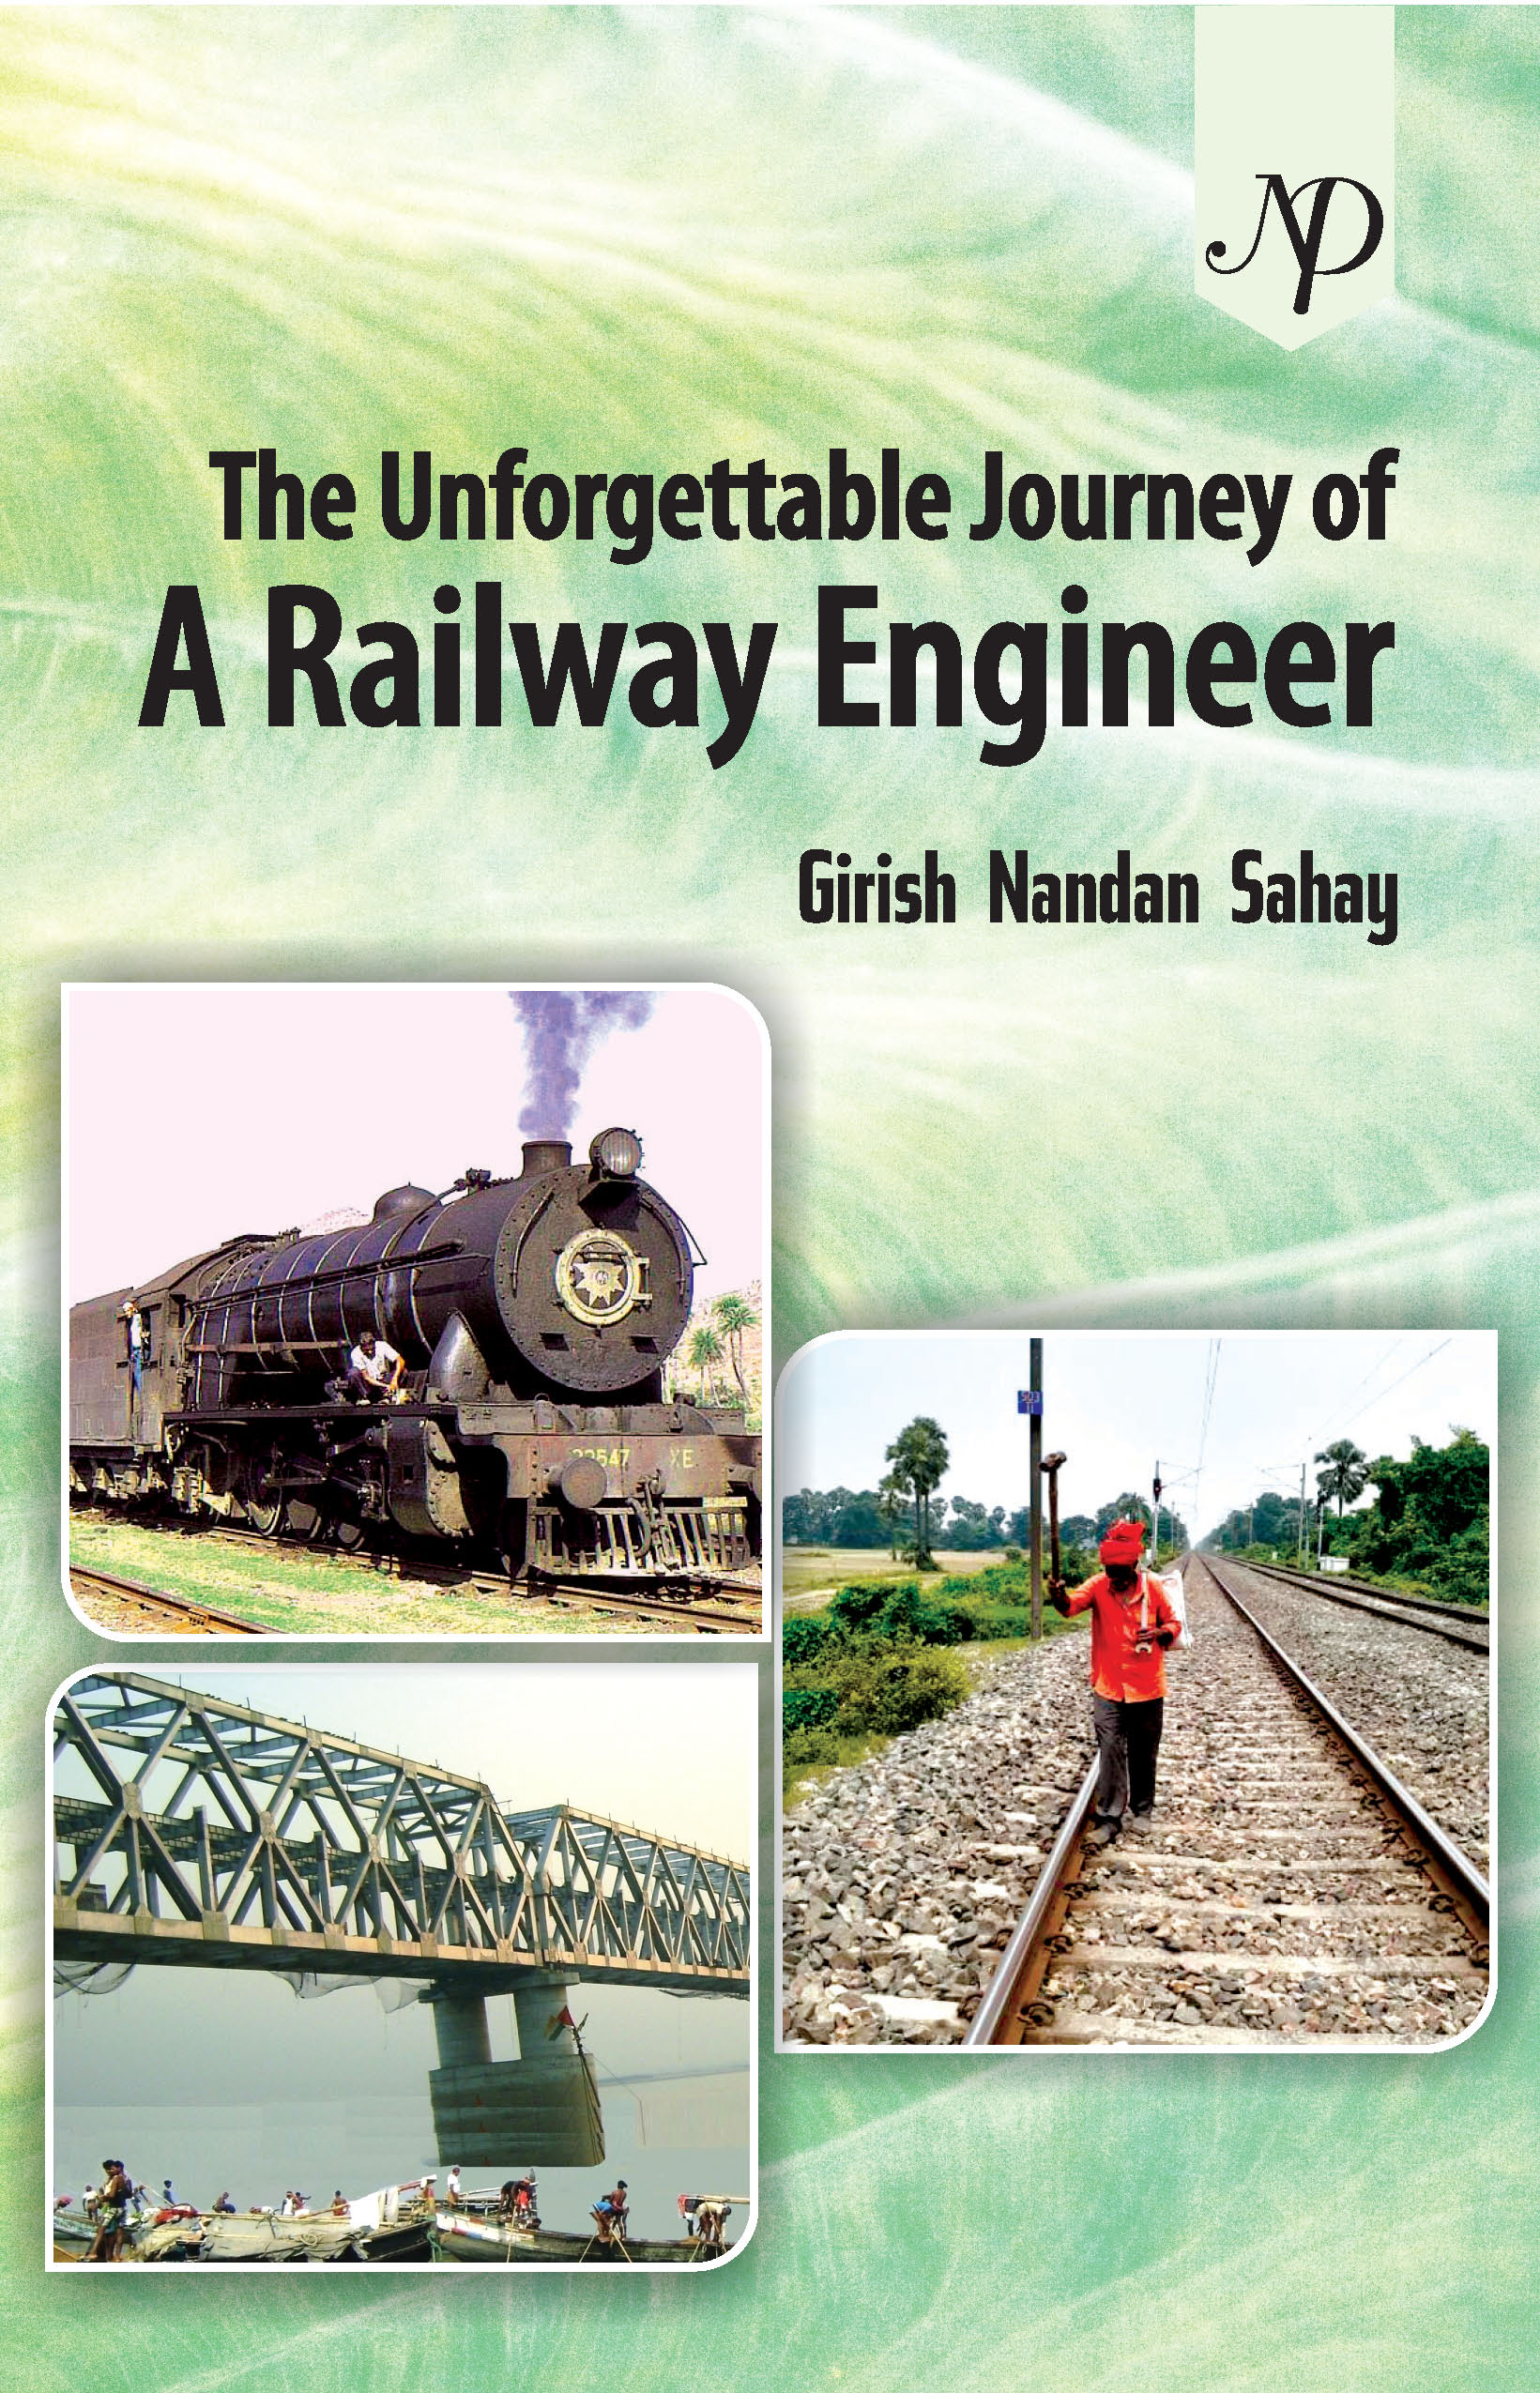 The unforgettable journey of a Railway Engineer Cover.jpg